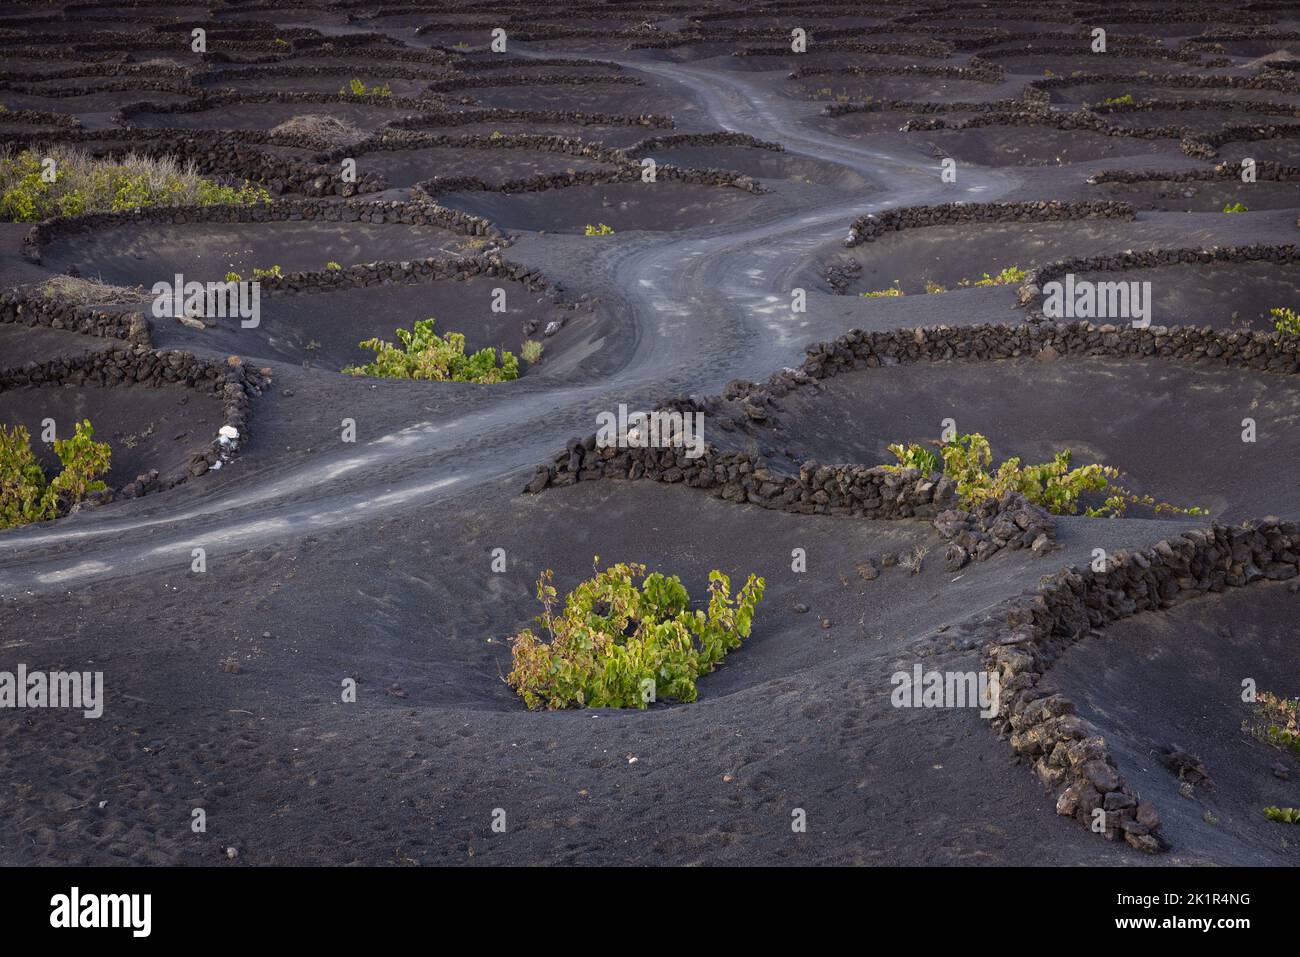 Typical vineyard in the La Geria region on the island of Lanzarote protecting the grapevines against the heavy winds by building walls out of lava sto Stock Photo